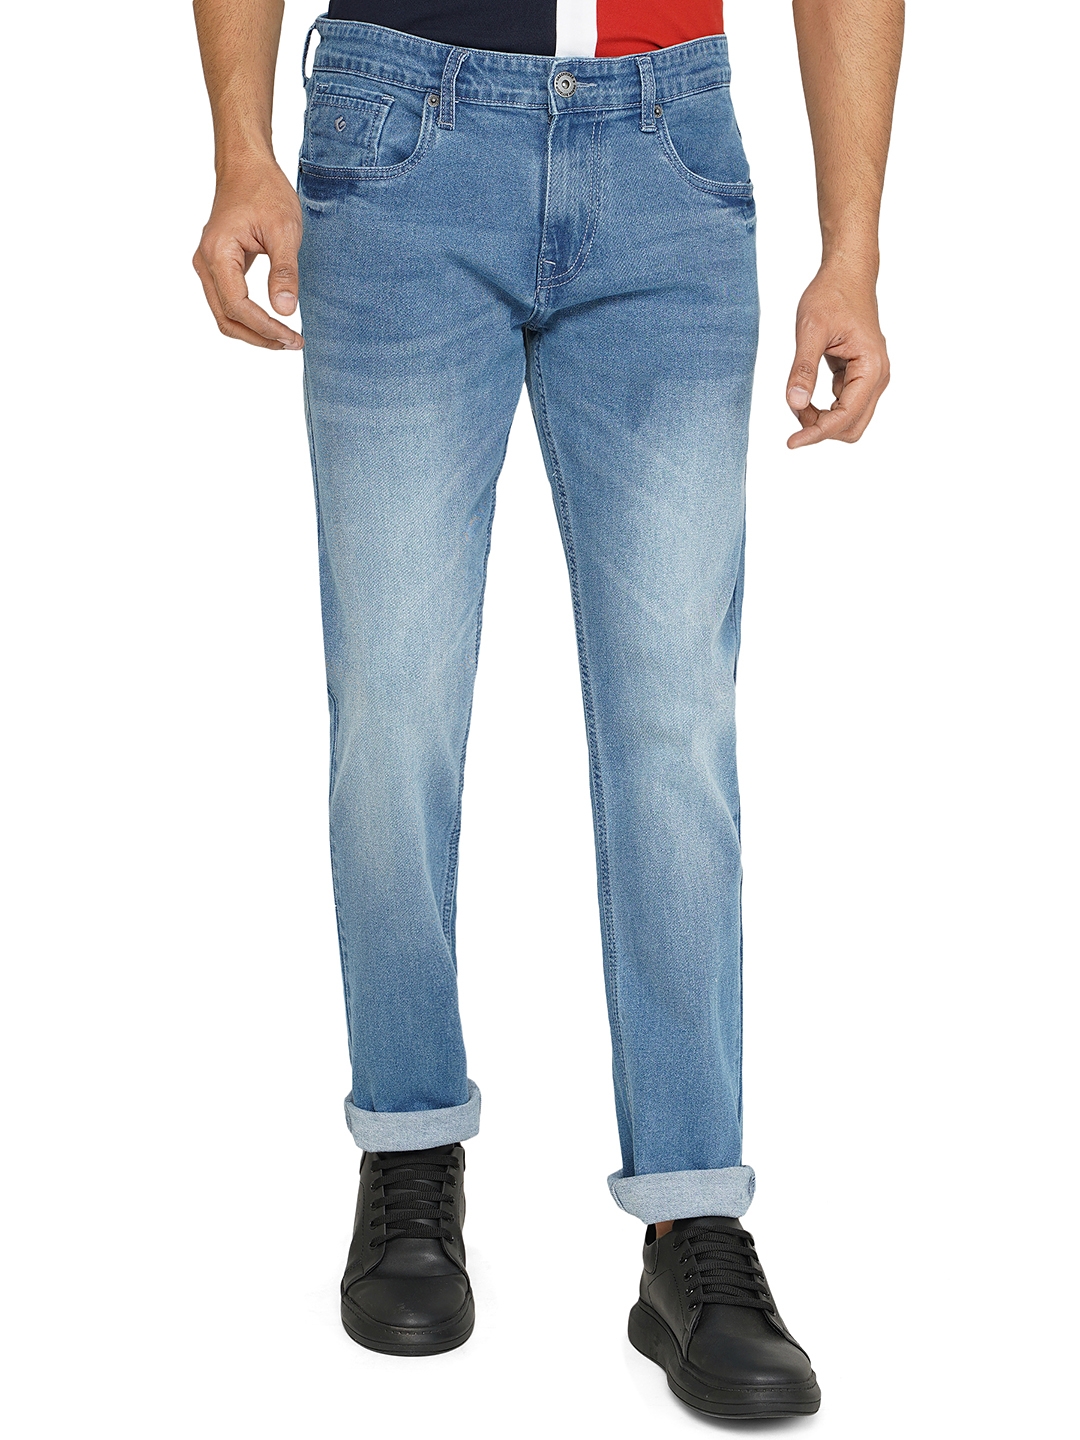 Greenfibre | Blue Washed Straight Fit Jeans | Greenfibre